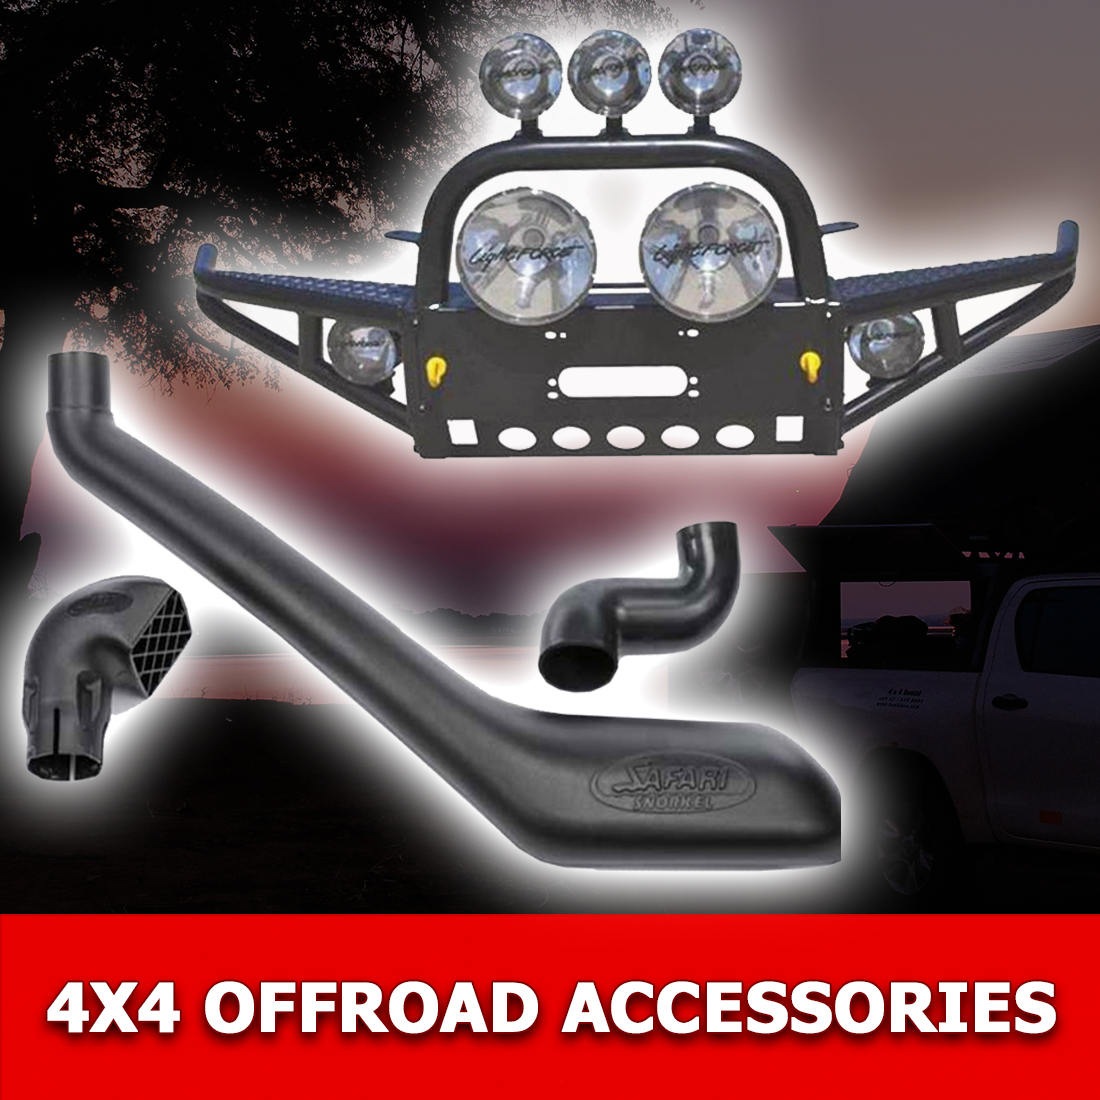 Playtime Auto Parts. Home of excellent 4x4 equipment.